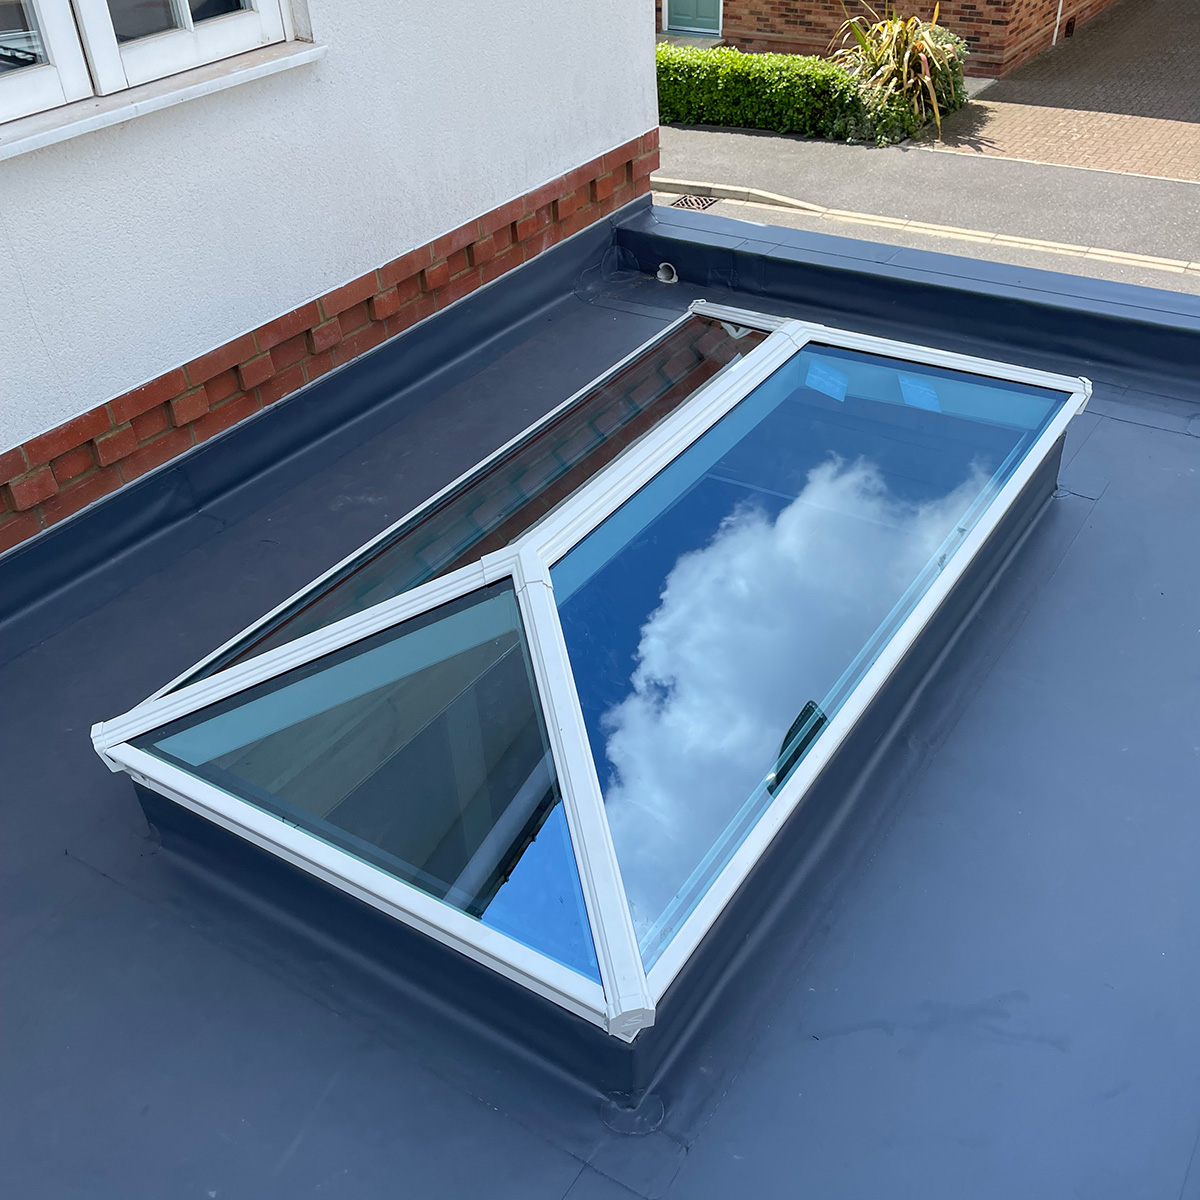 New extension flat roof